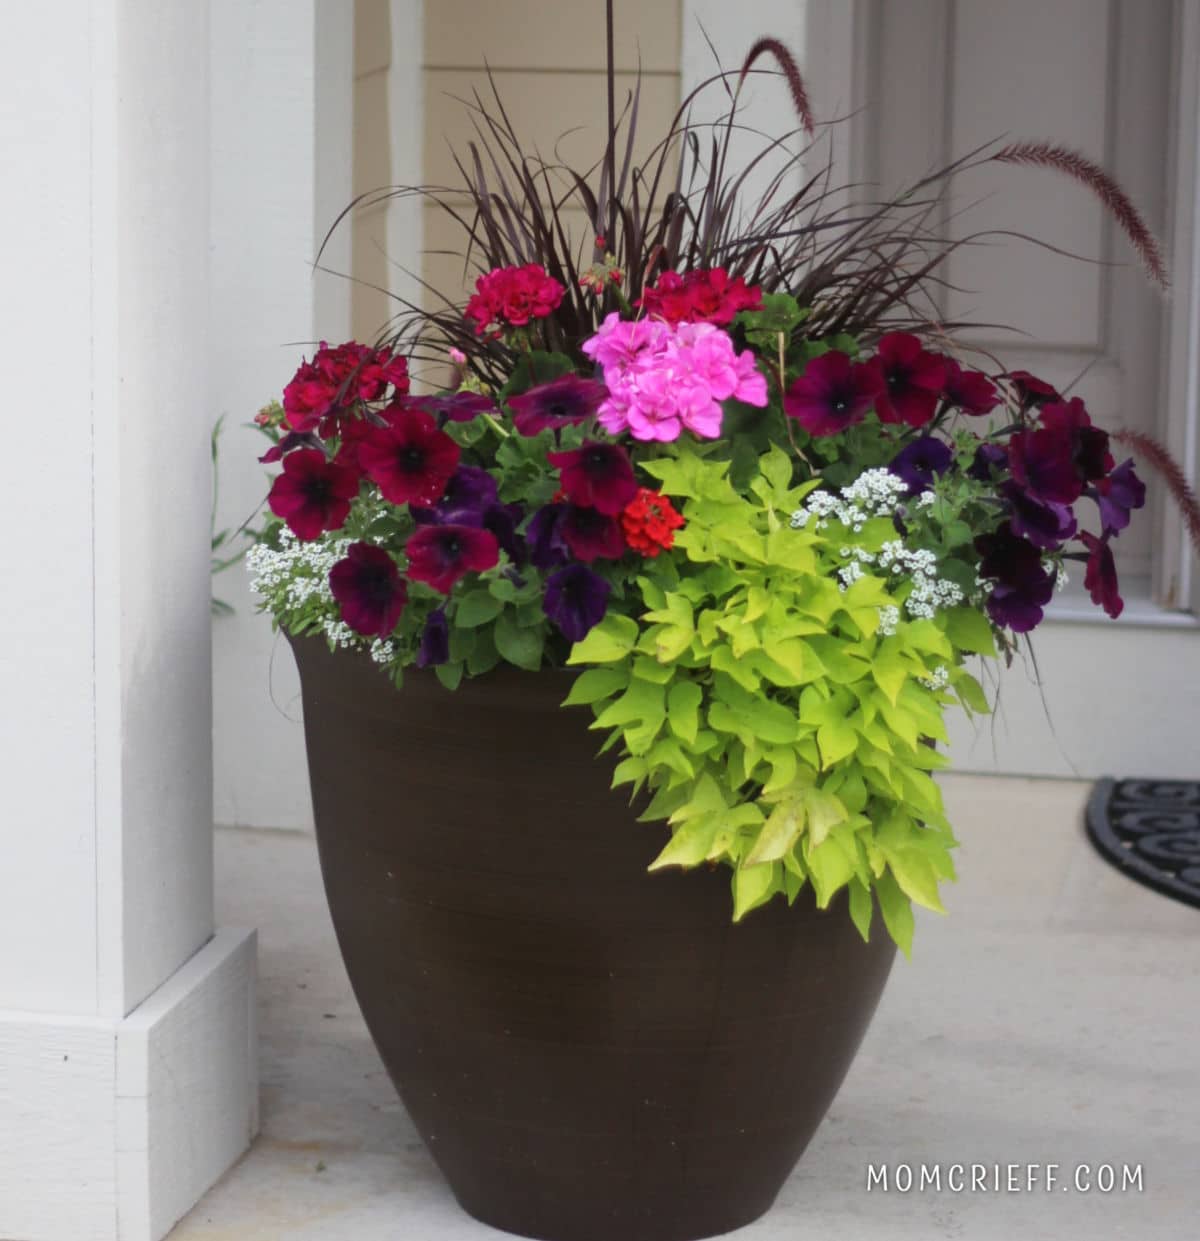 front door planter with pink petunias, reddish geraniums, spikey grasses and bright green sweet potato vine